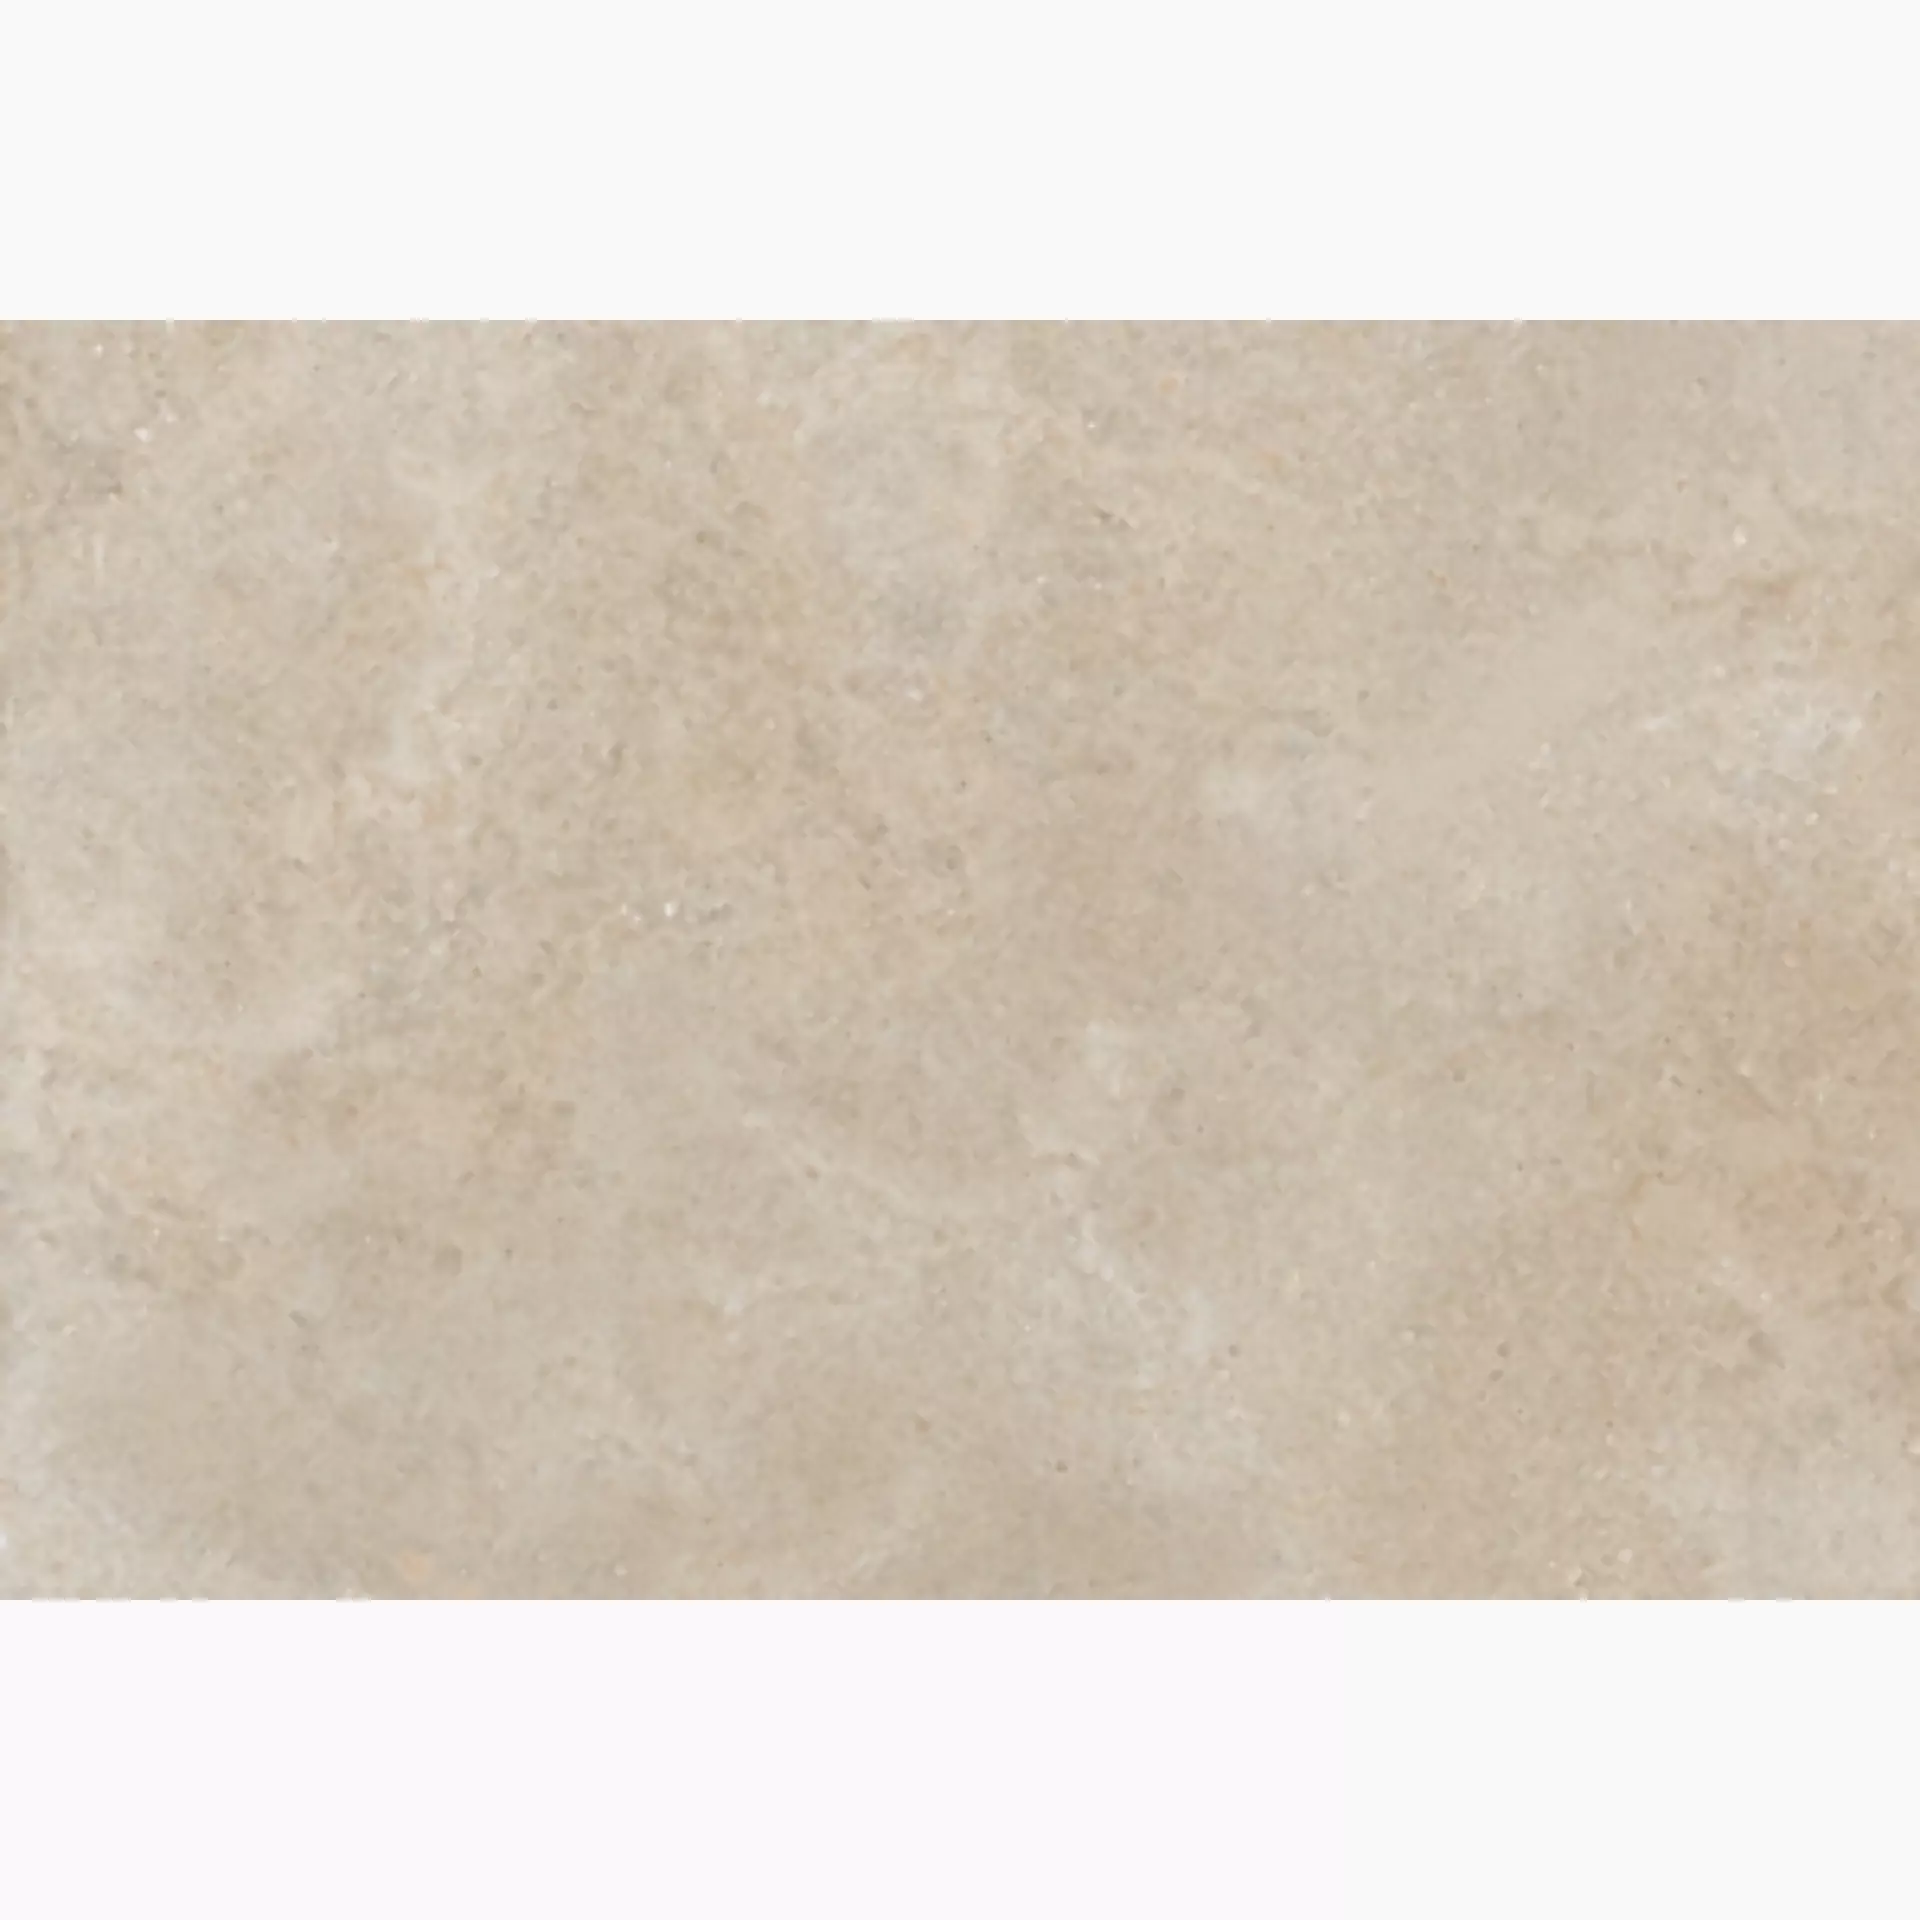 Keope Brystone Gold Strutturato 44595732 60x90cm rectified 20mm